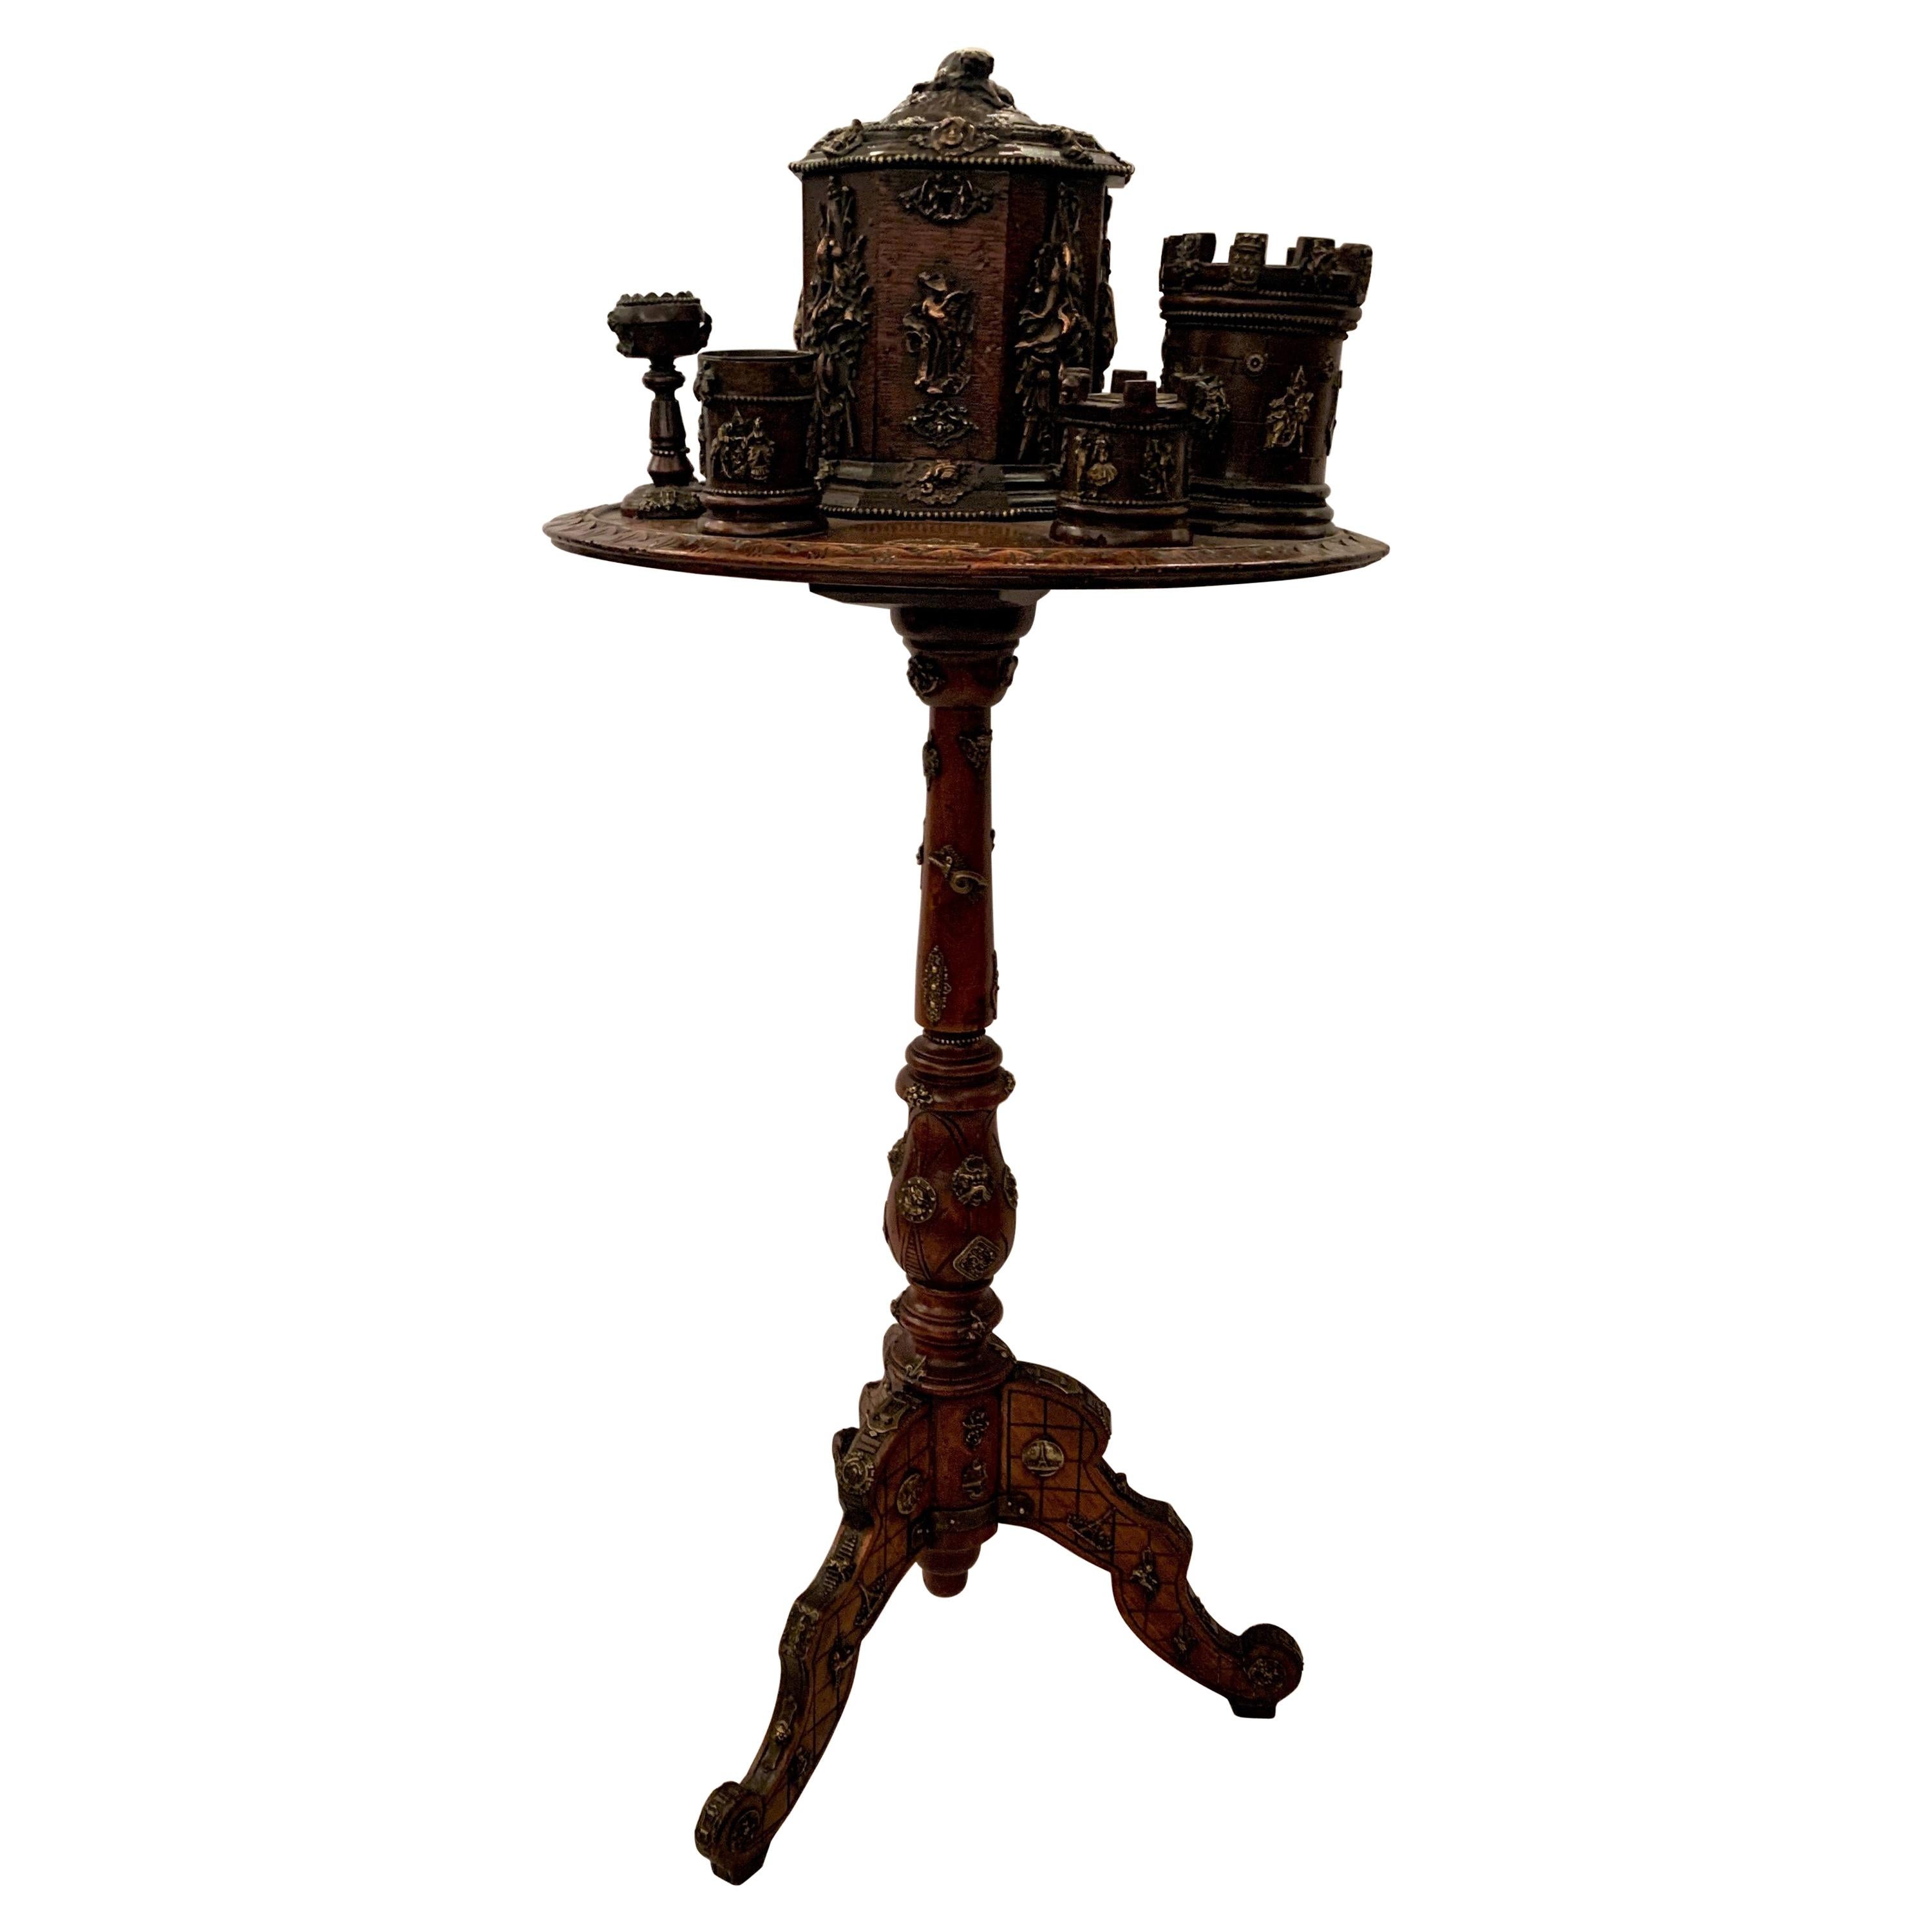 Antique 19th Century English Copper & Brass Mounted Carved Walnut Smoker's Table